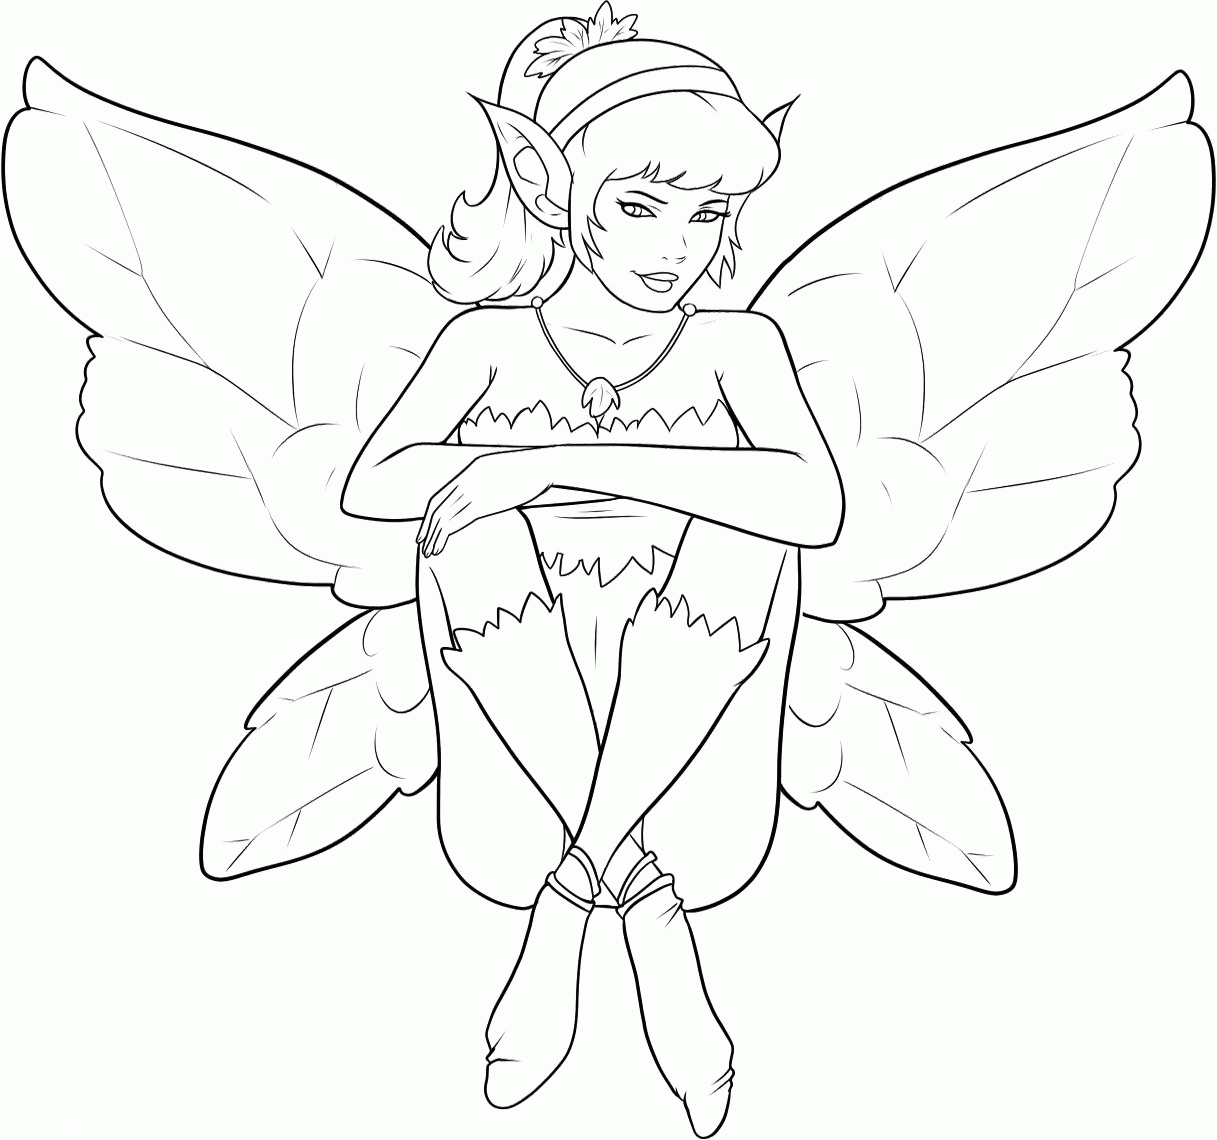 Free Fairy Sit Down Coloring Pages For Adults - VoteForVerde.com